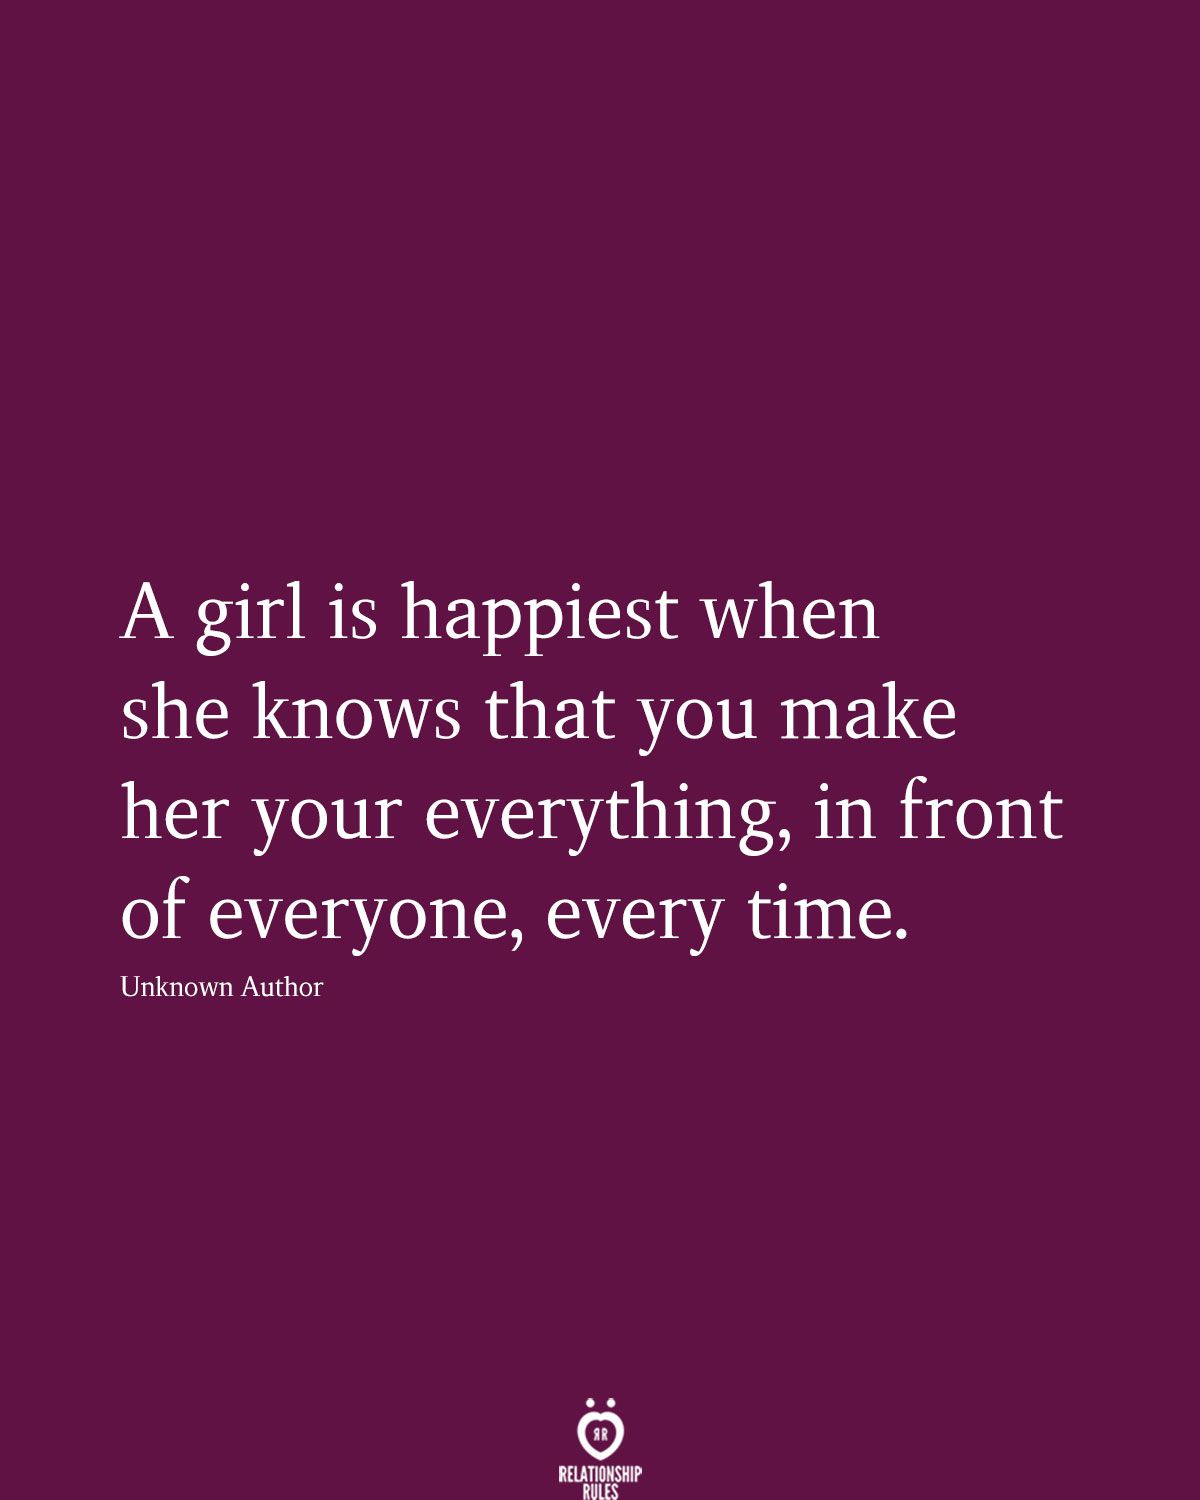 A girl is happiest when she knows that you make her your everything, in front of everyone, every time.